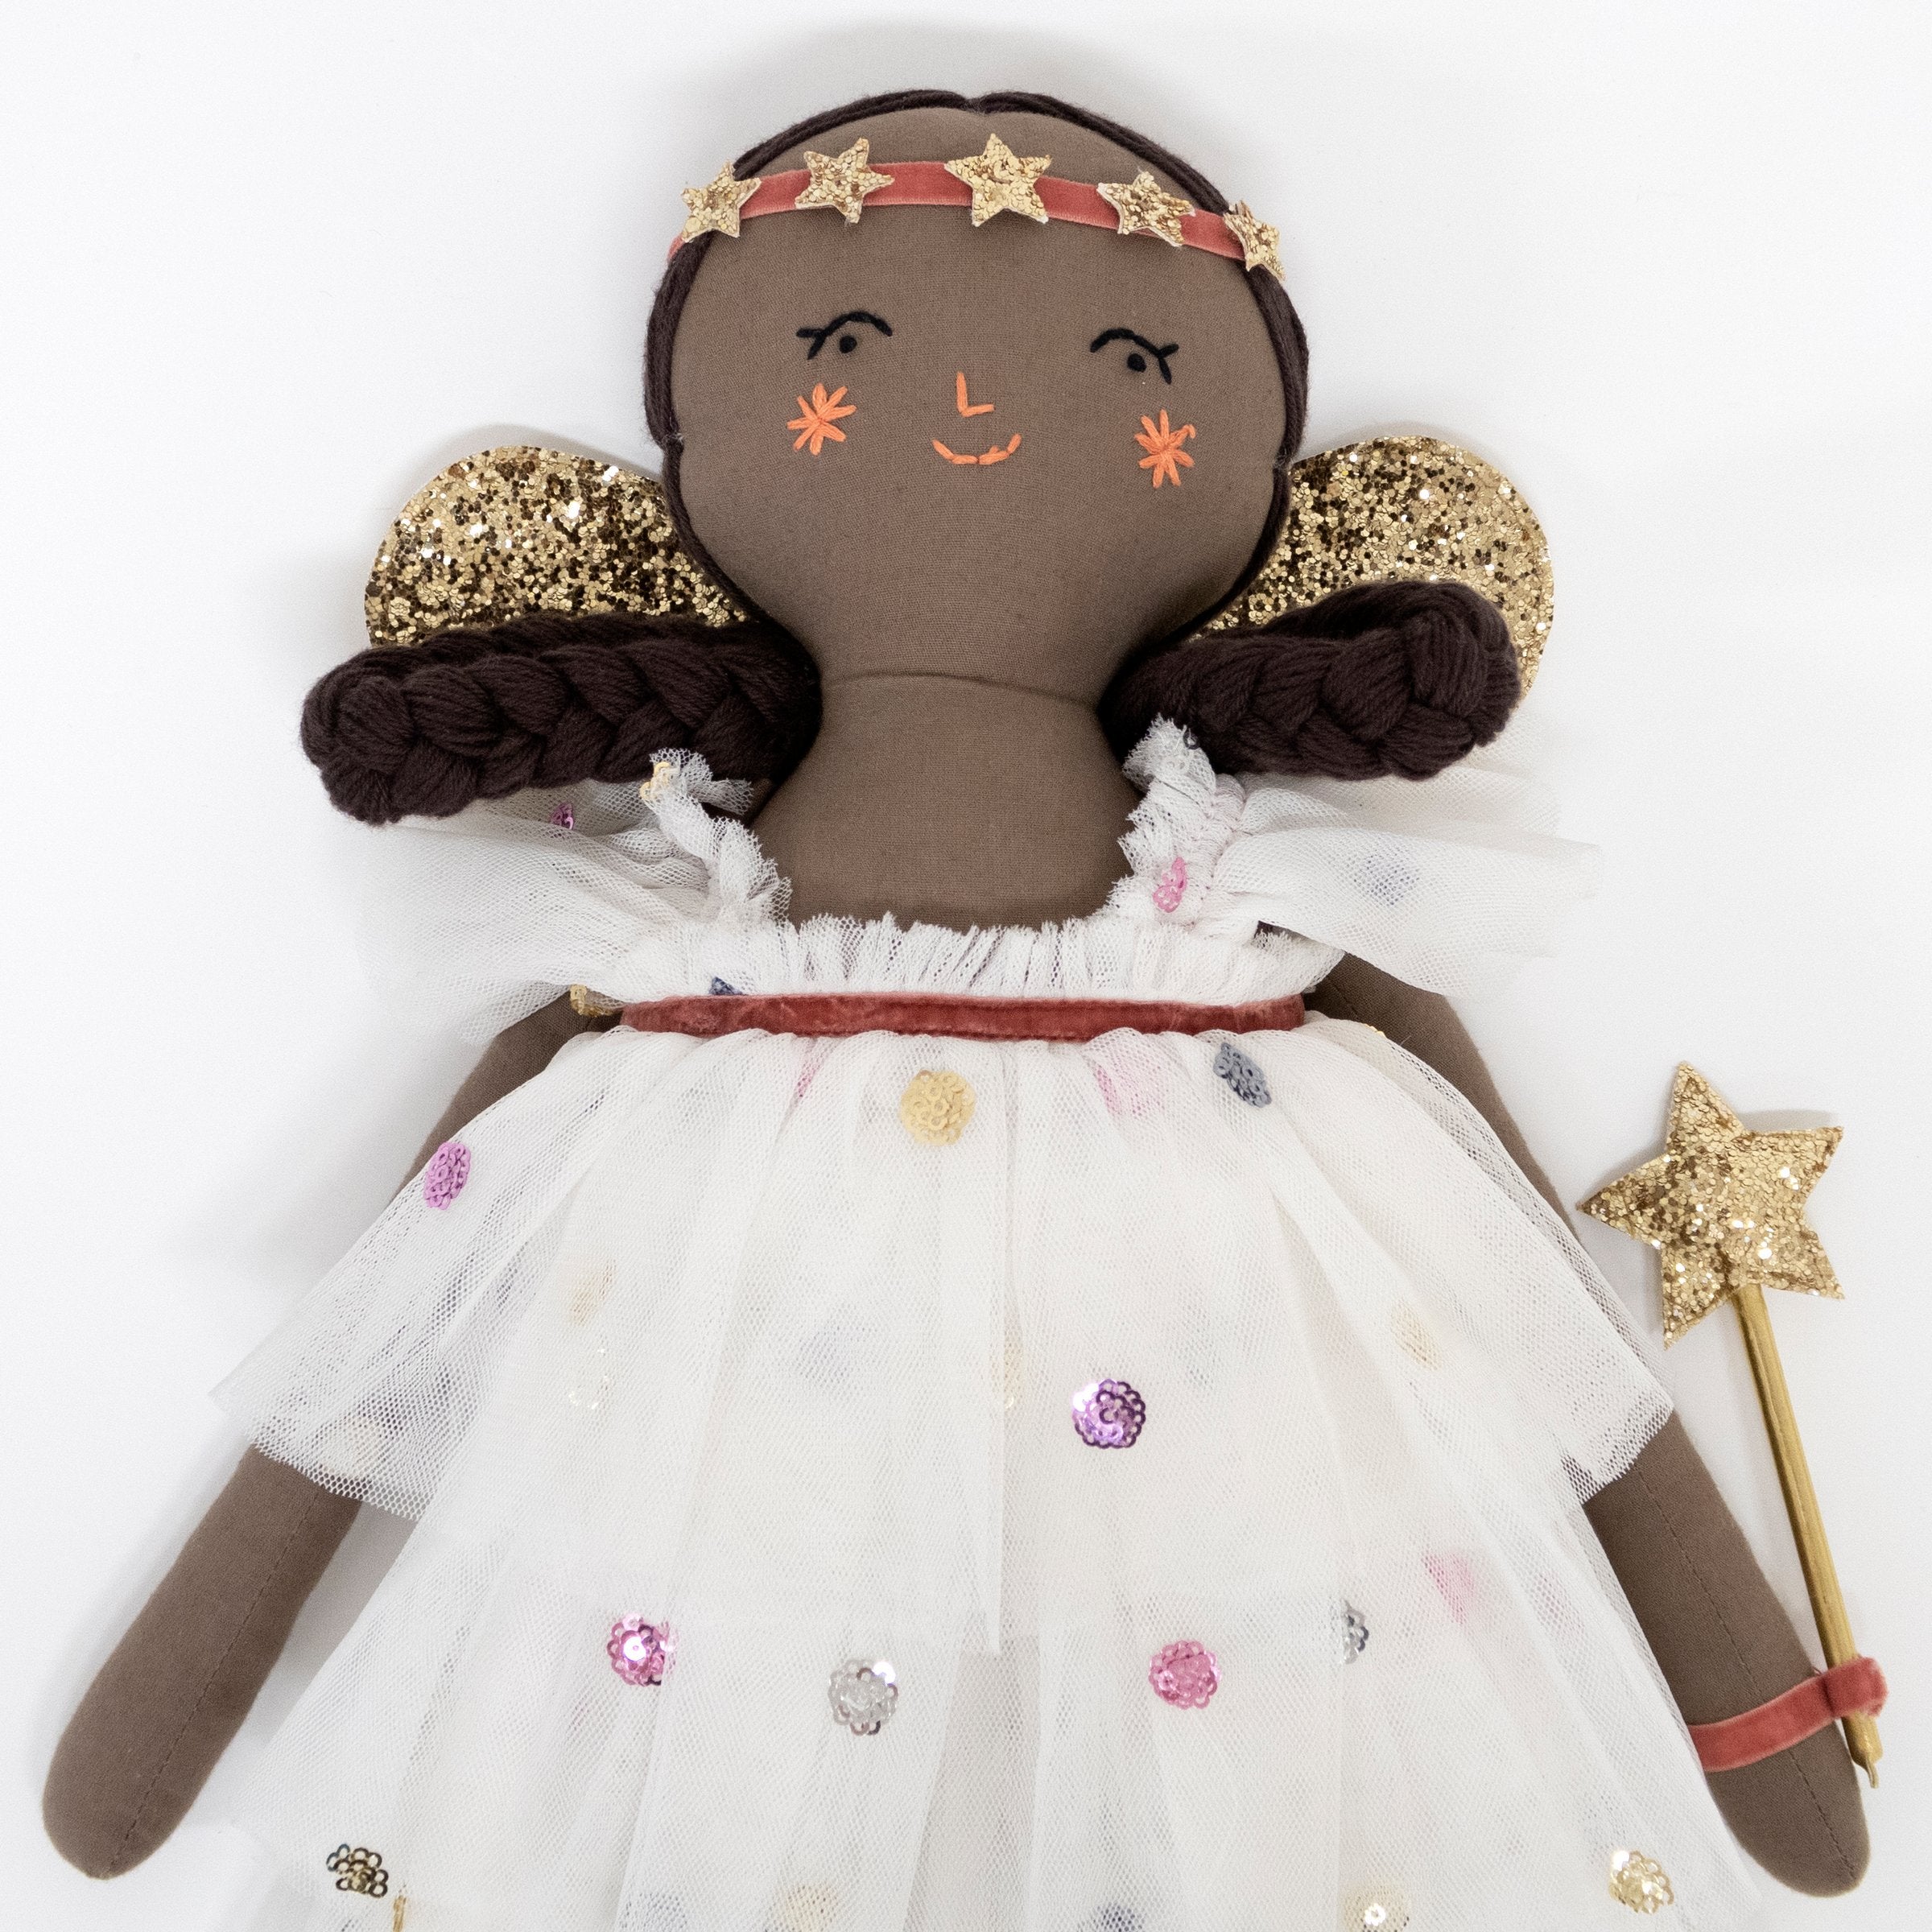 Our Florence Angel is a wonderful doll for girls.